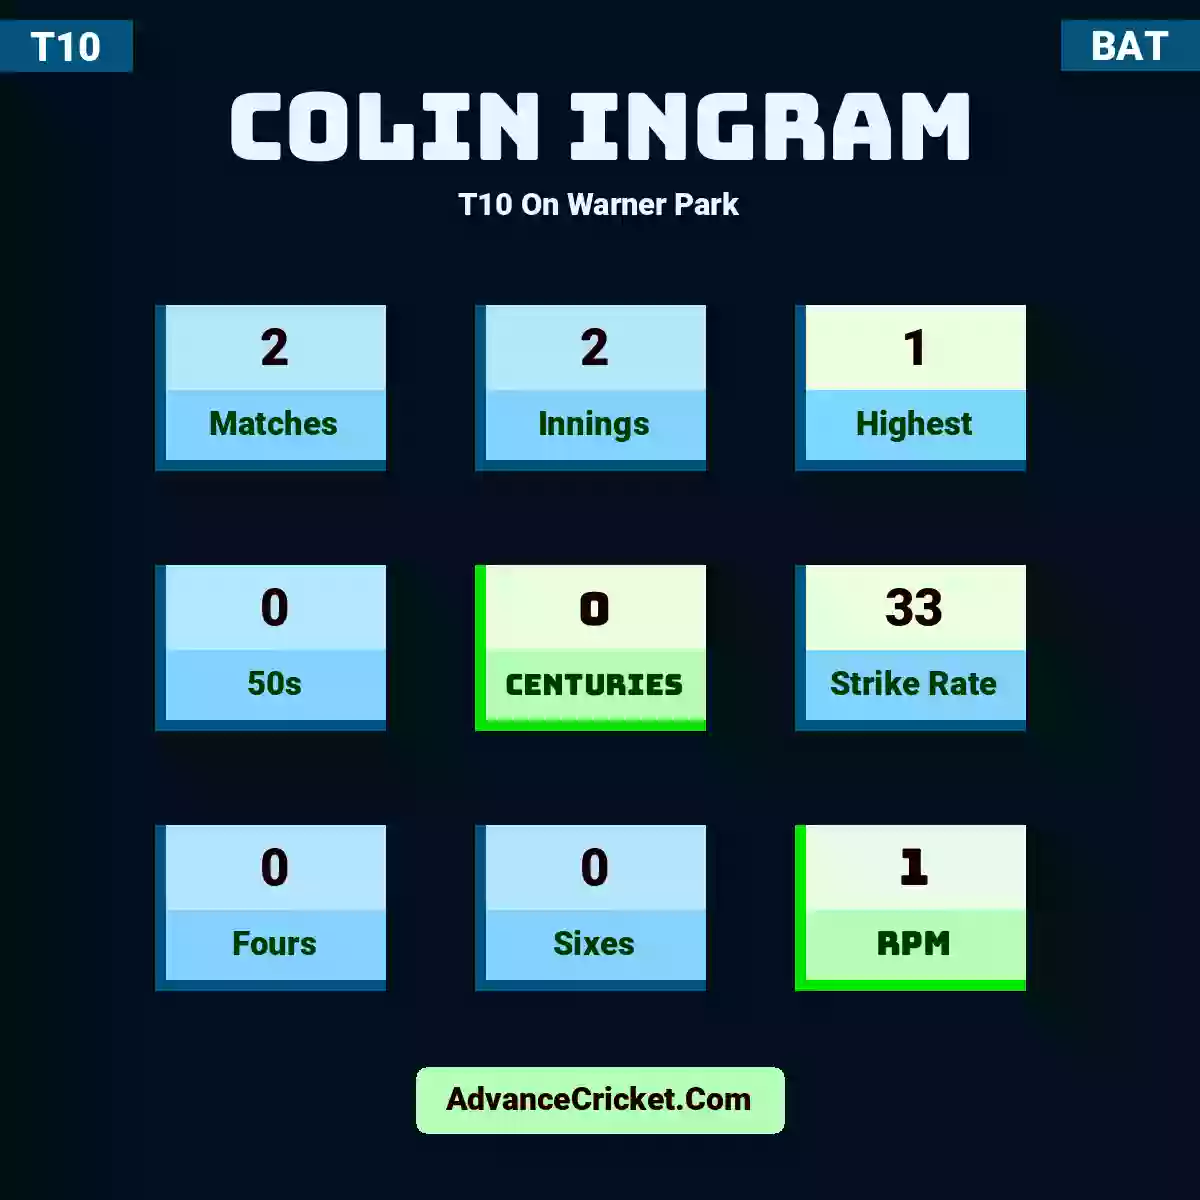 Colin Ingram T10  On Warner Park, Colin Ingram played 2 matches, scored 1 runs as highest, 0 half-centuries, and 0 centuries, with a strike rate of 33. C.Ingram hit 0 fours and 0 sixes, with an RPM of 1.